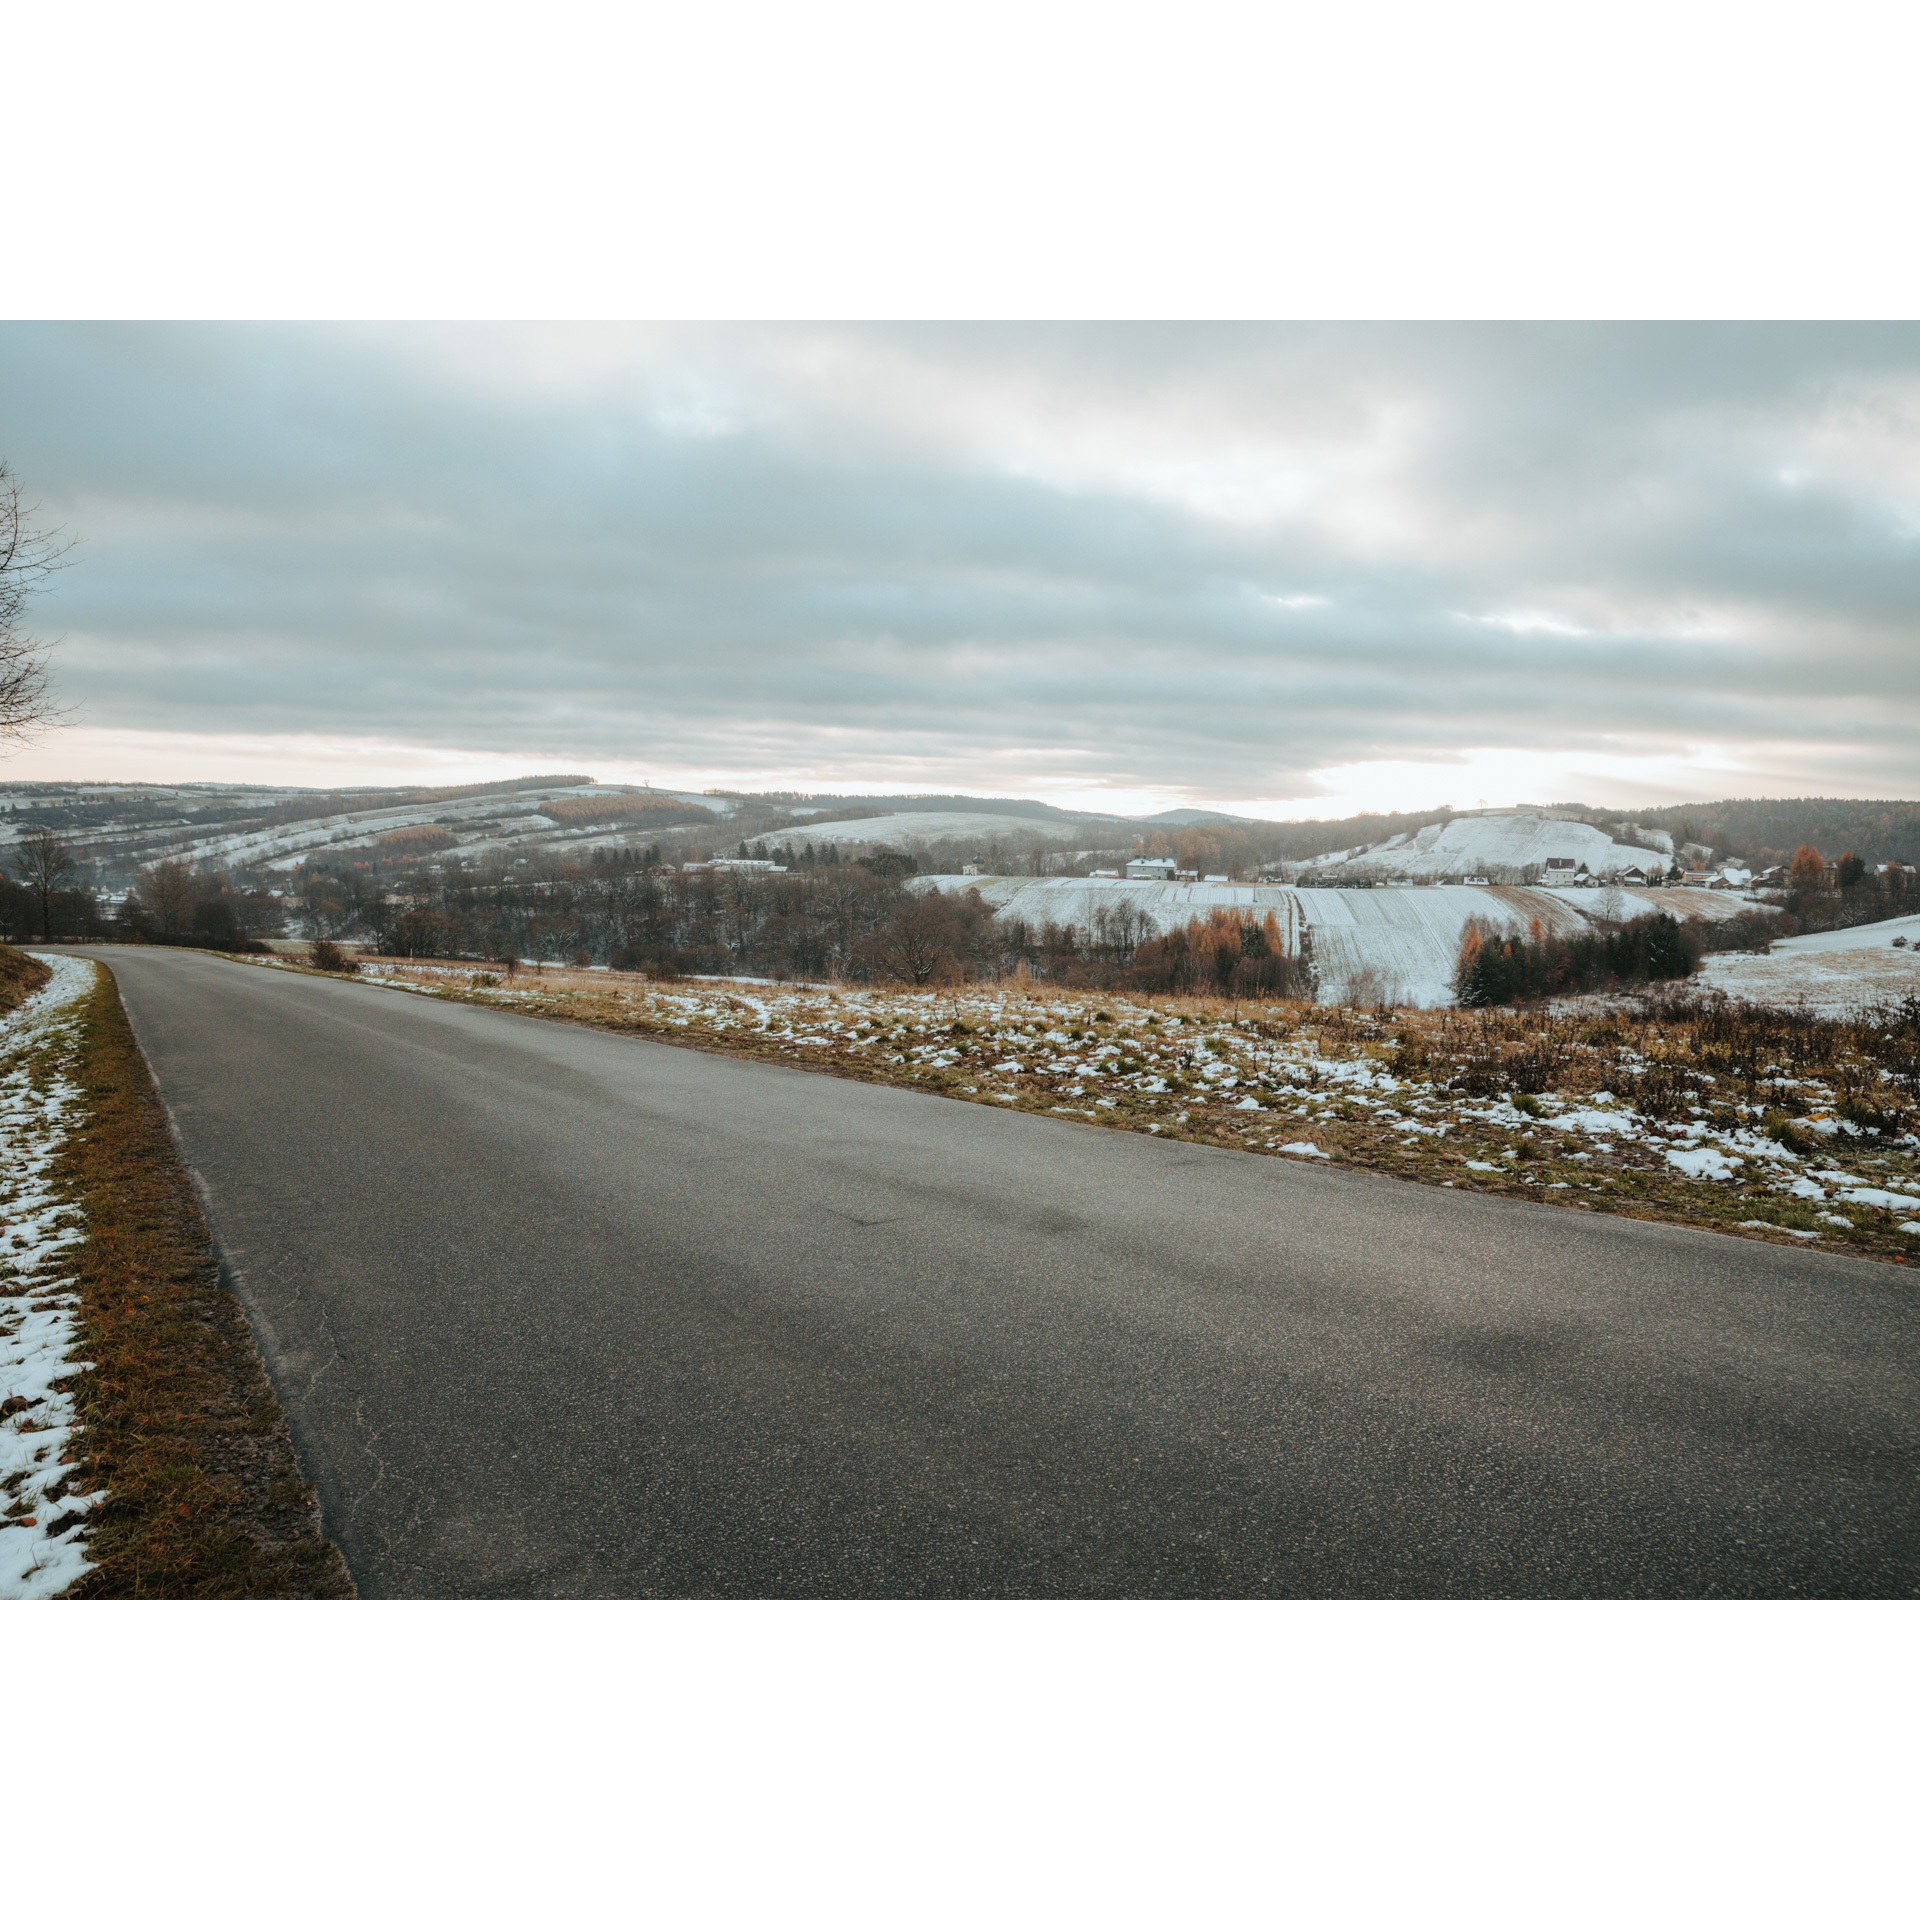 An asphalt road with a view of lightly snowy hills and trees without leaves and a cloudy sky